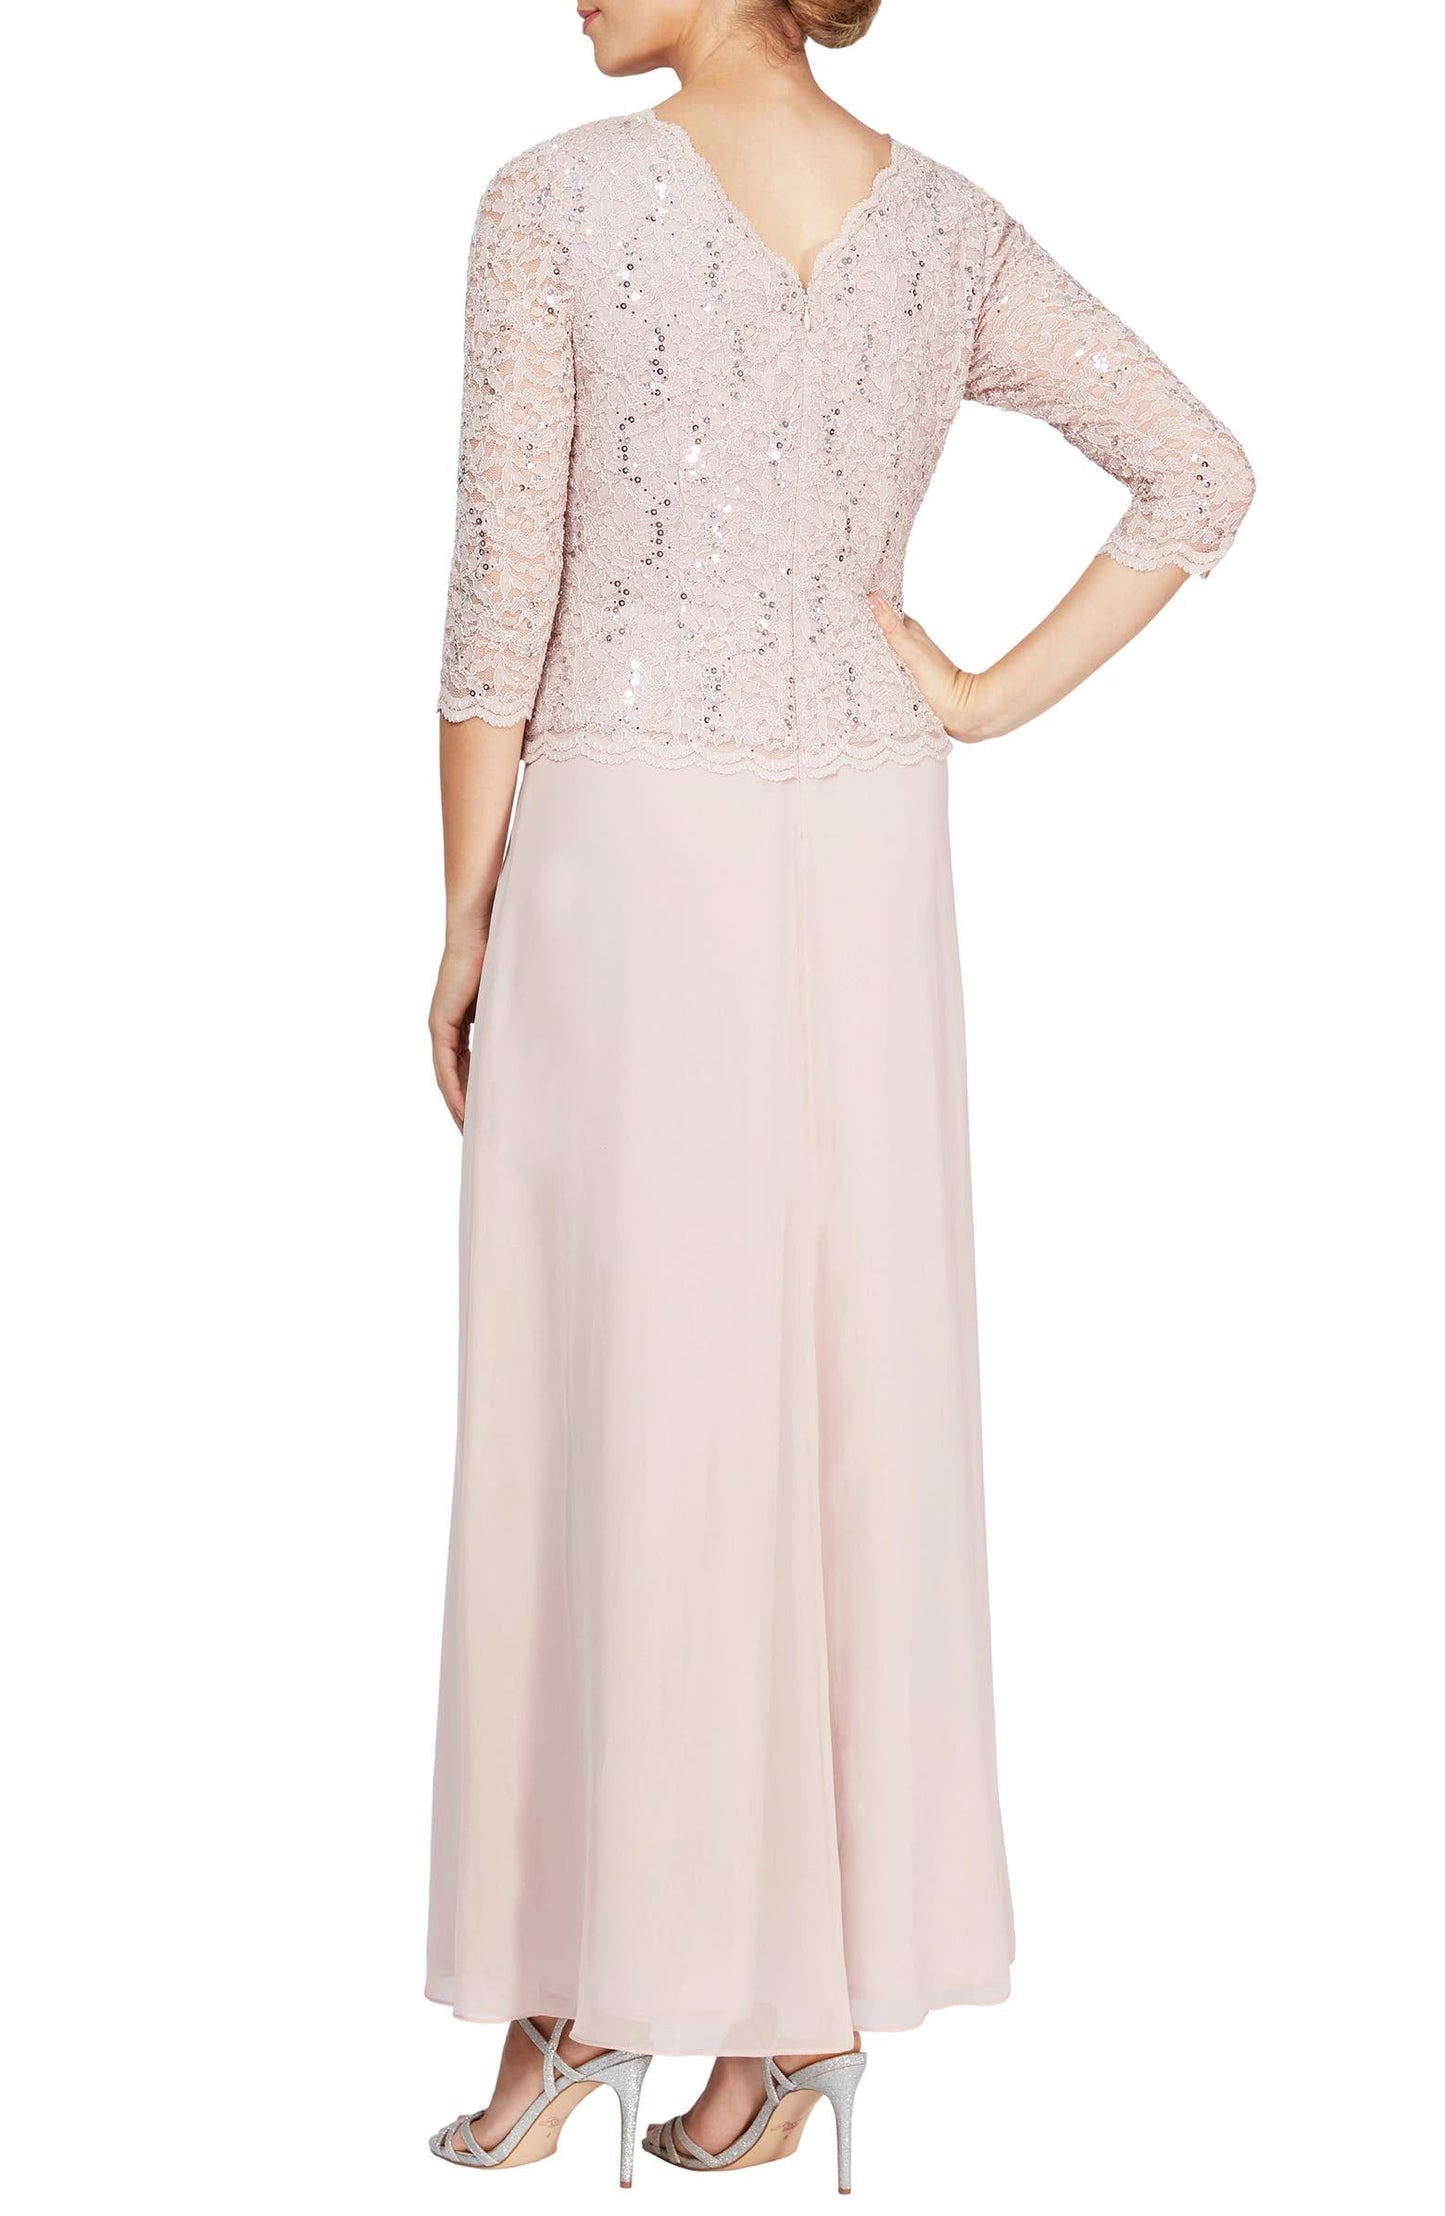 Alex Evenings Petite Women's Sequin Lace to Chiffon Mother of The Bride Dress